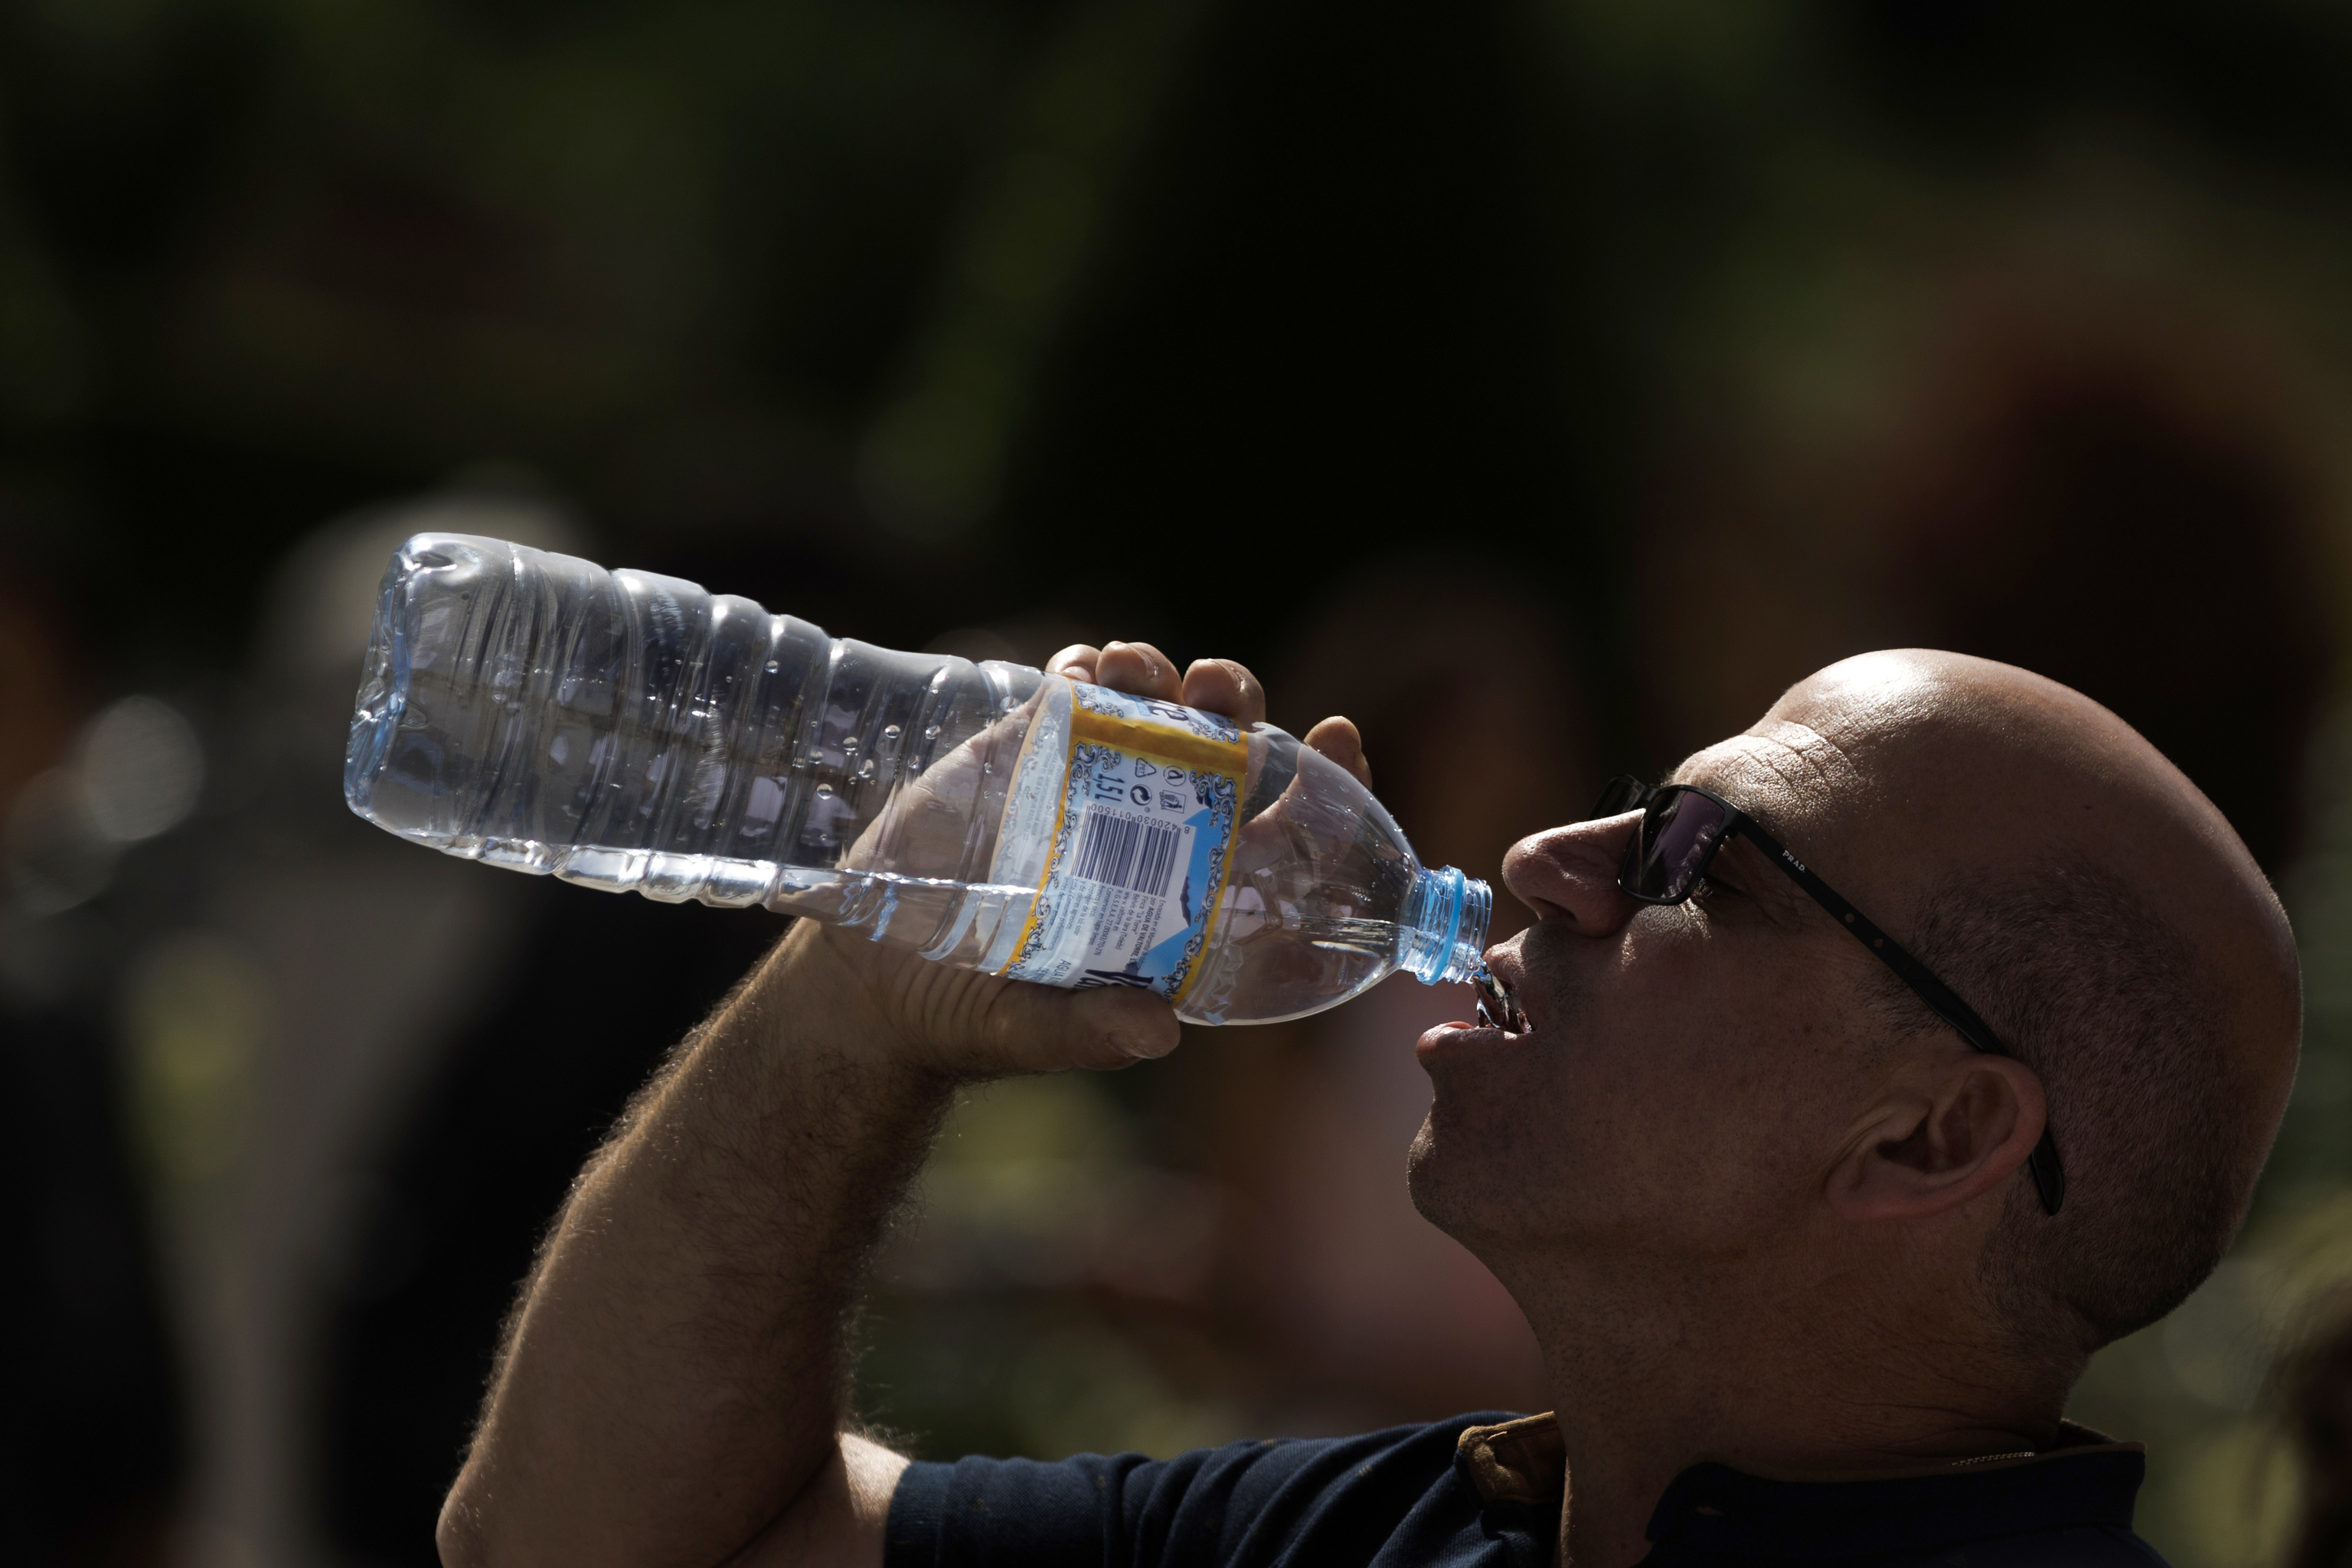 a person hydrates in high temperatures